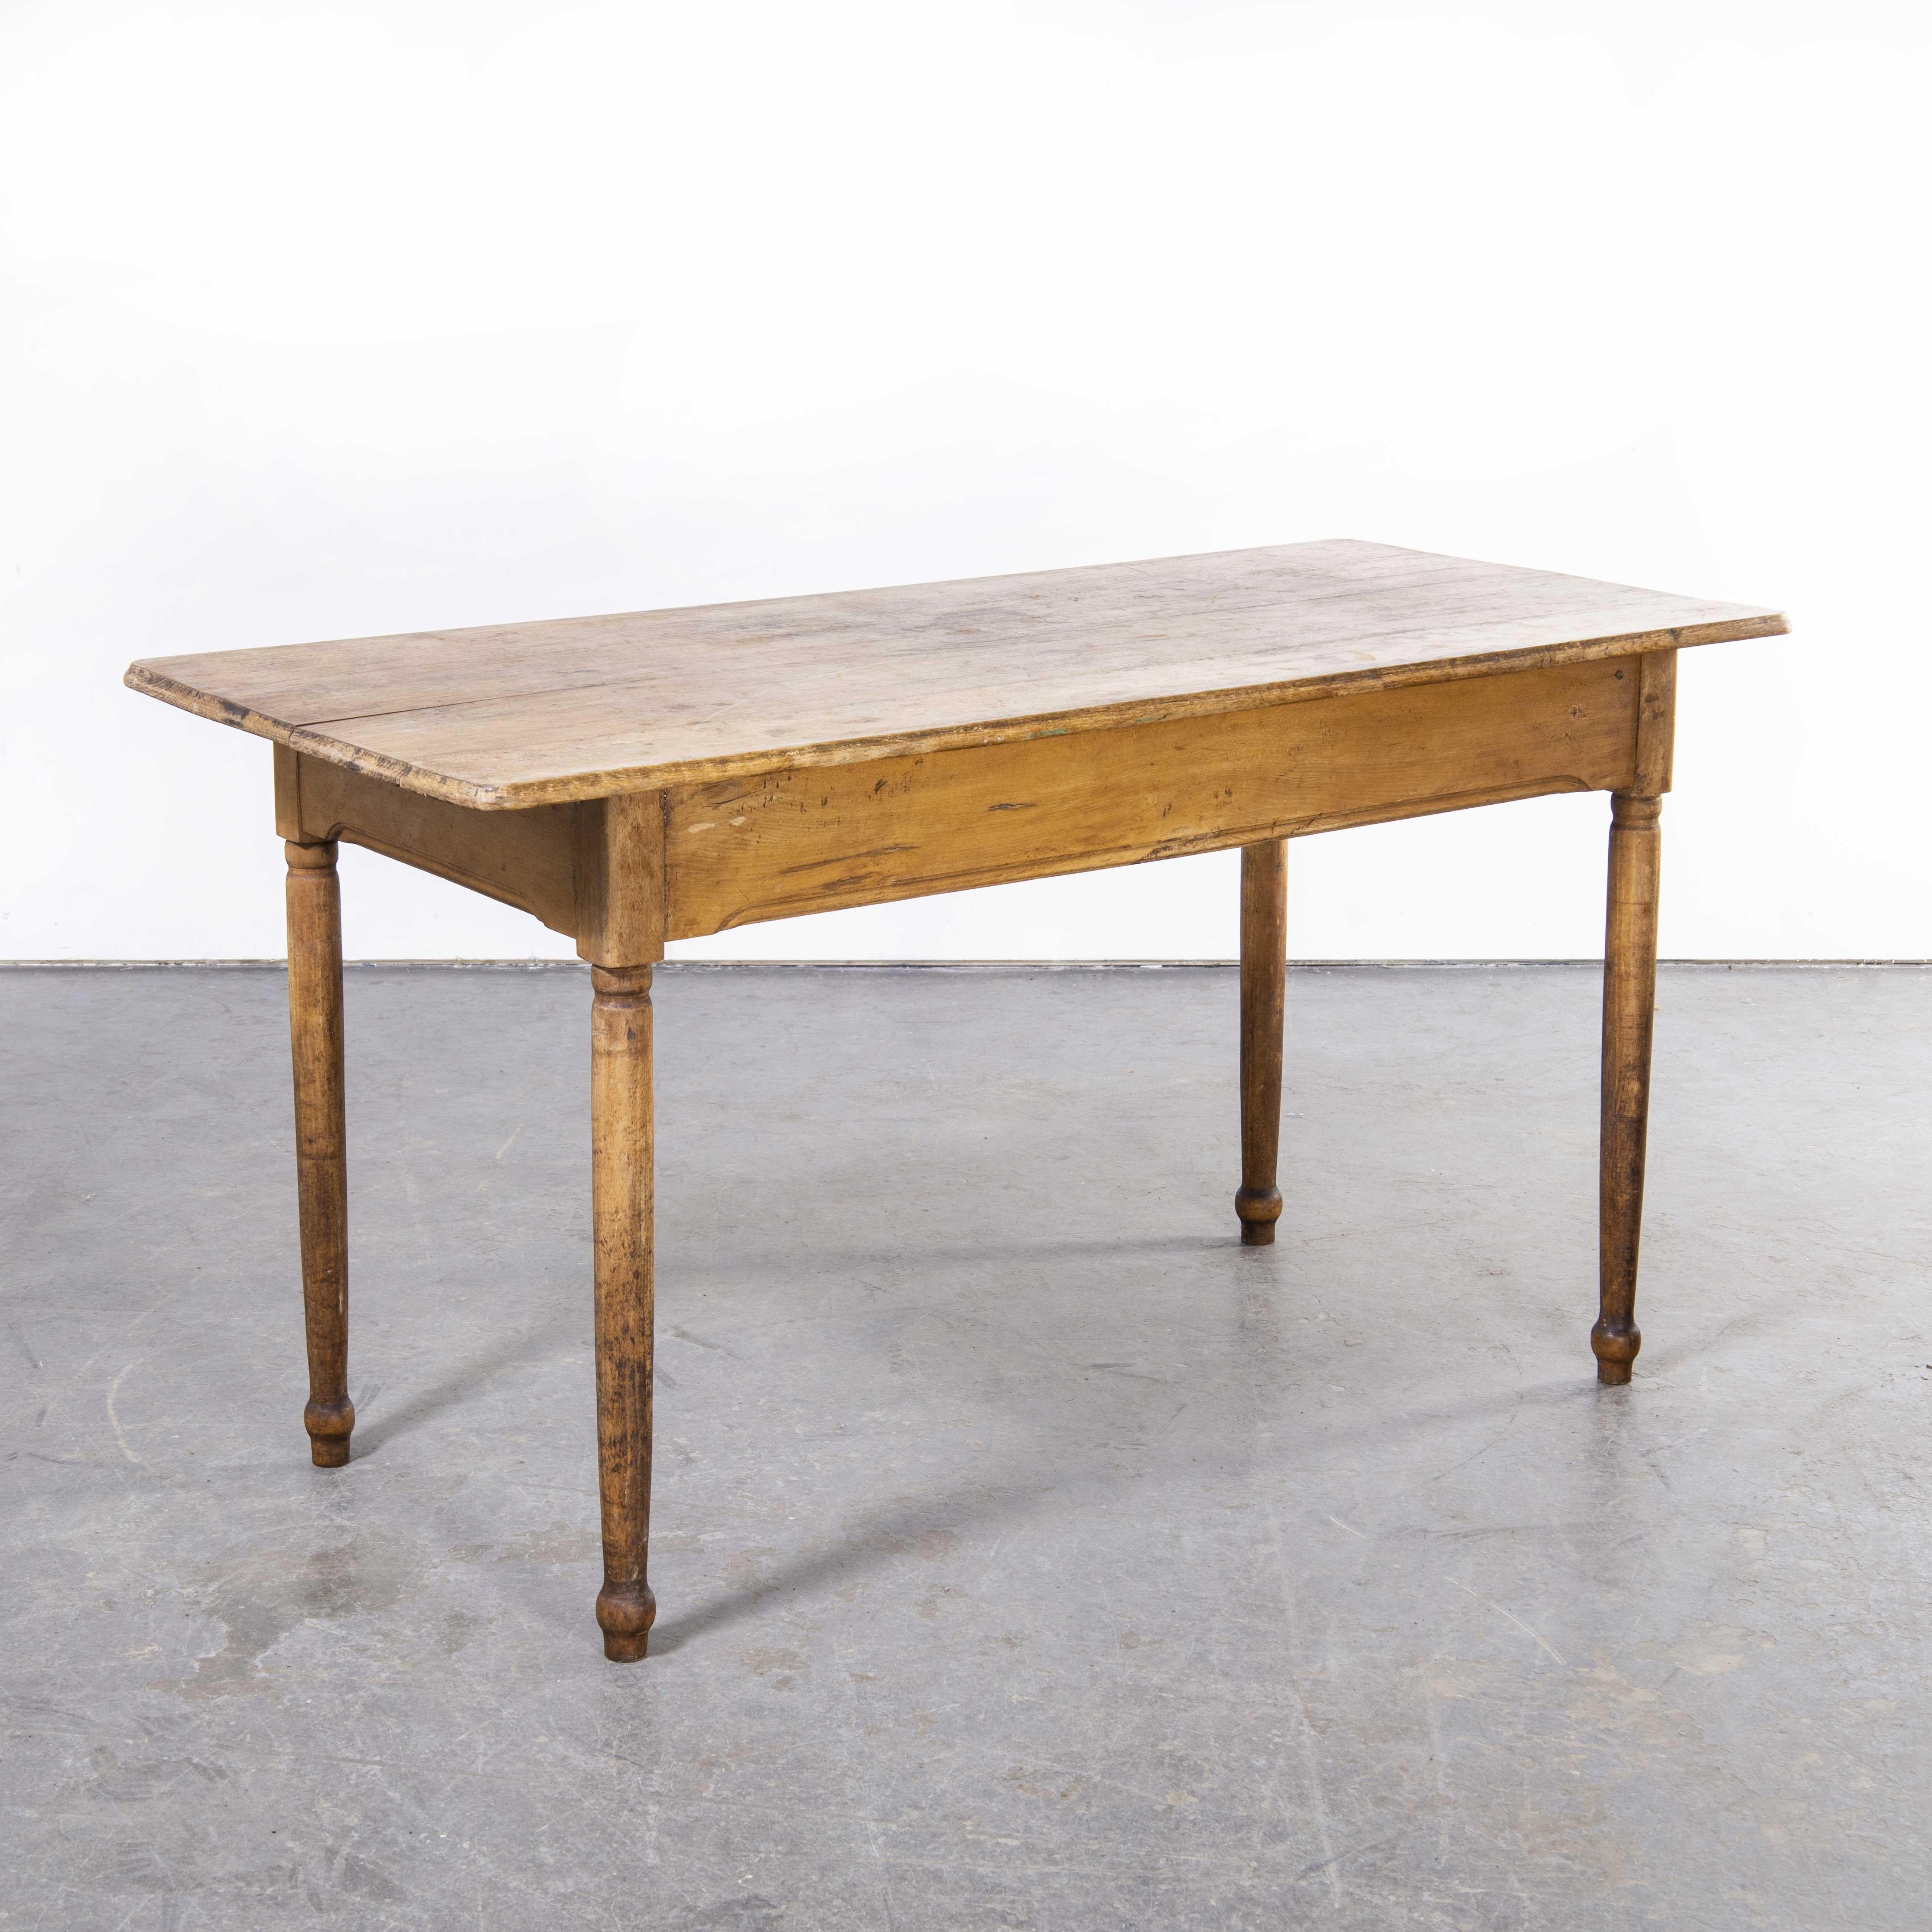 1950’s French Fruitwood Rectangular Dining Table (1606.1)
1950’s French Fruitwood Rectangular Dining Table (1606.1). Very simple but beautiful French dining table, originally we sourced several tables from a small Caf? outside Lyon. The tables are